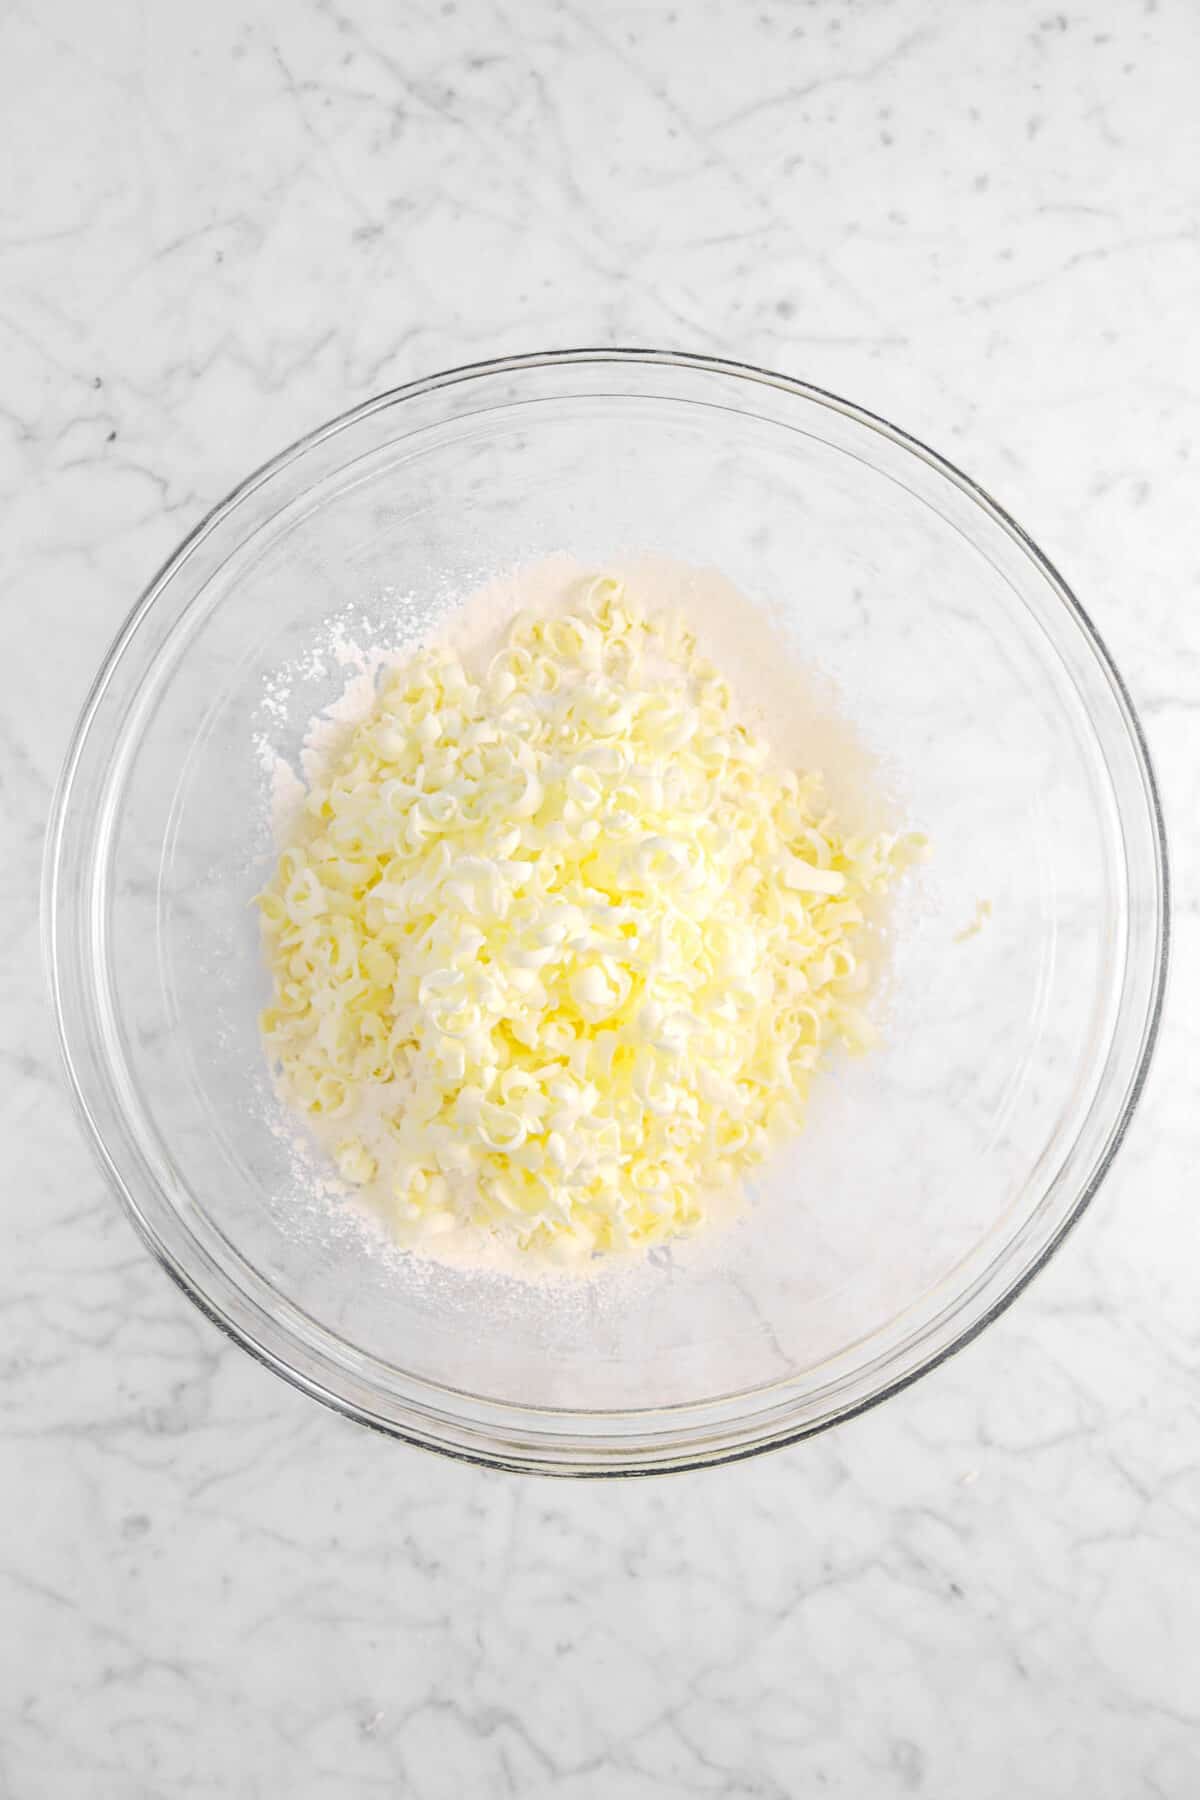 butter graded over dry ingredients